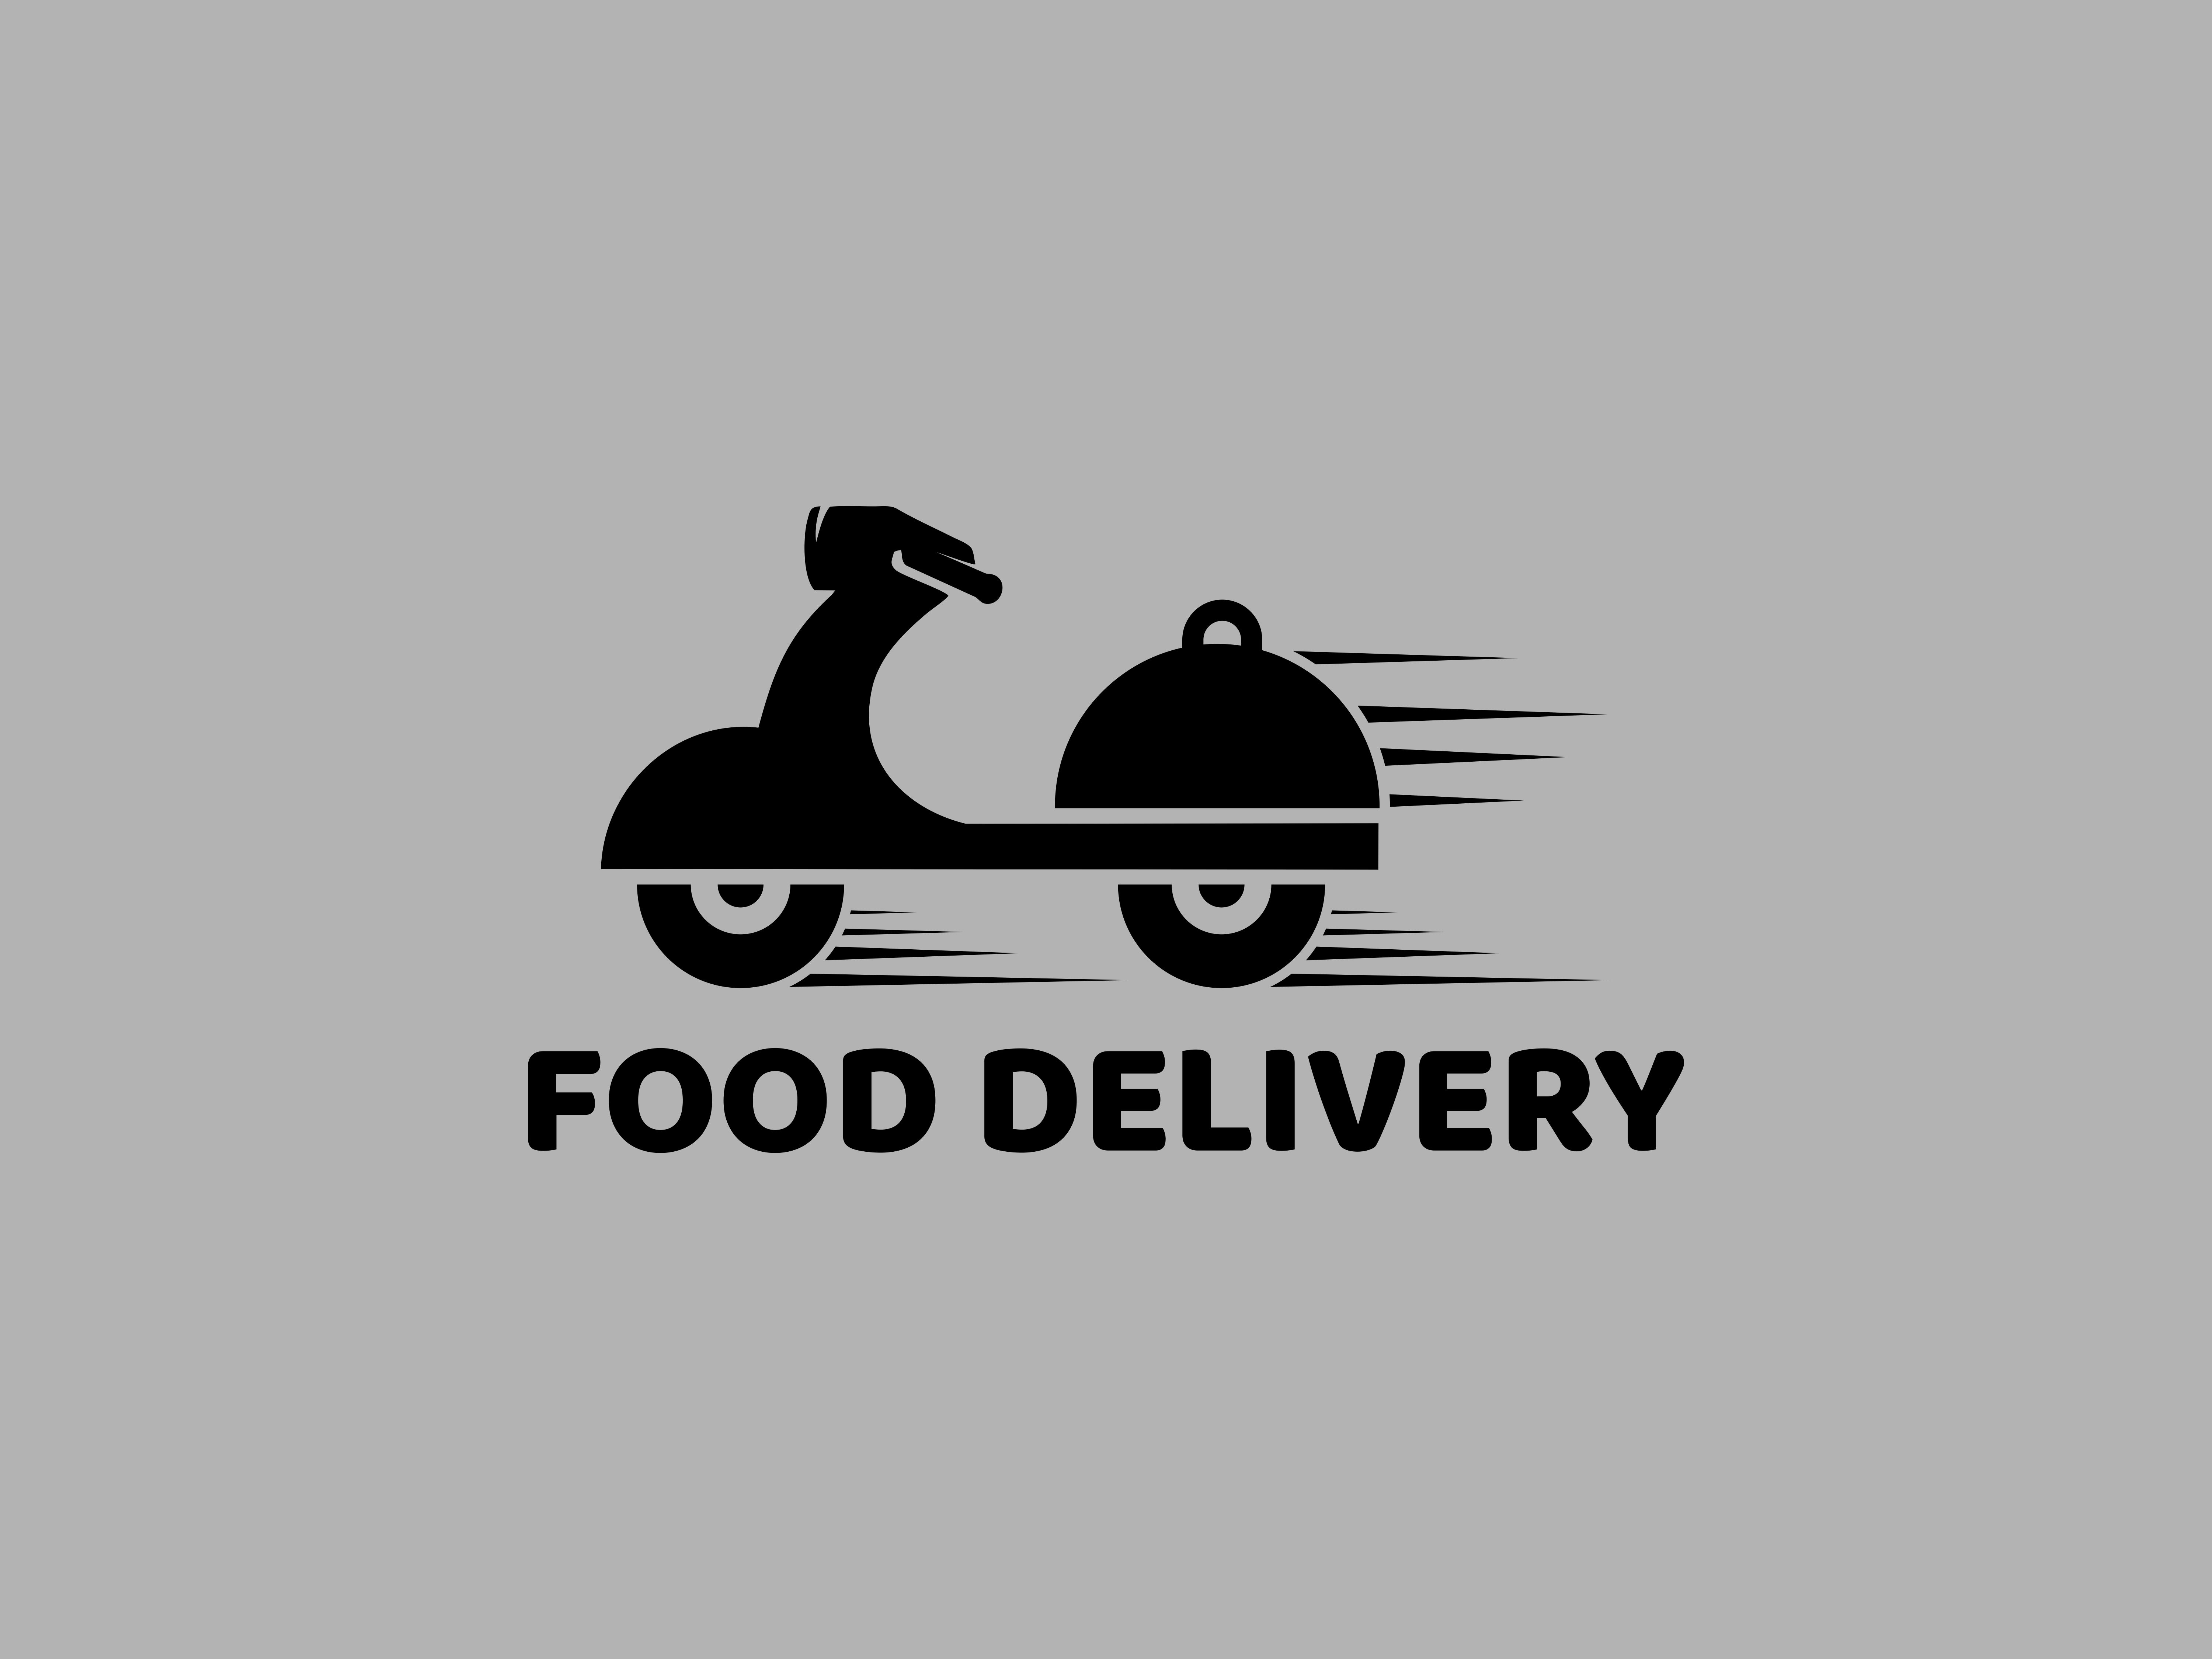 KrASIA Daily: Didi Chuxing Launches Food-delivery Pilot in Wuxi to Contend against Meituan-Dianping